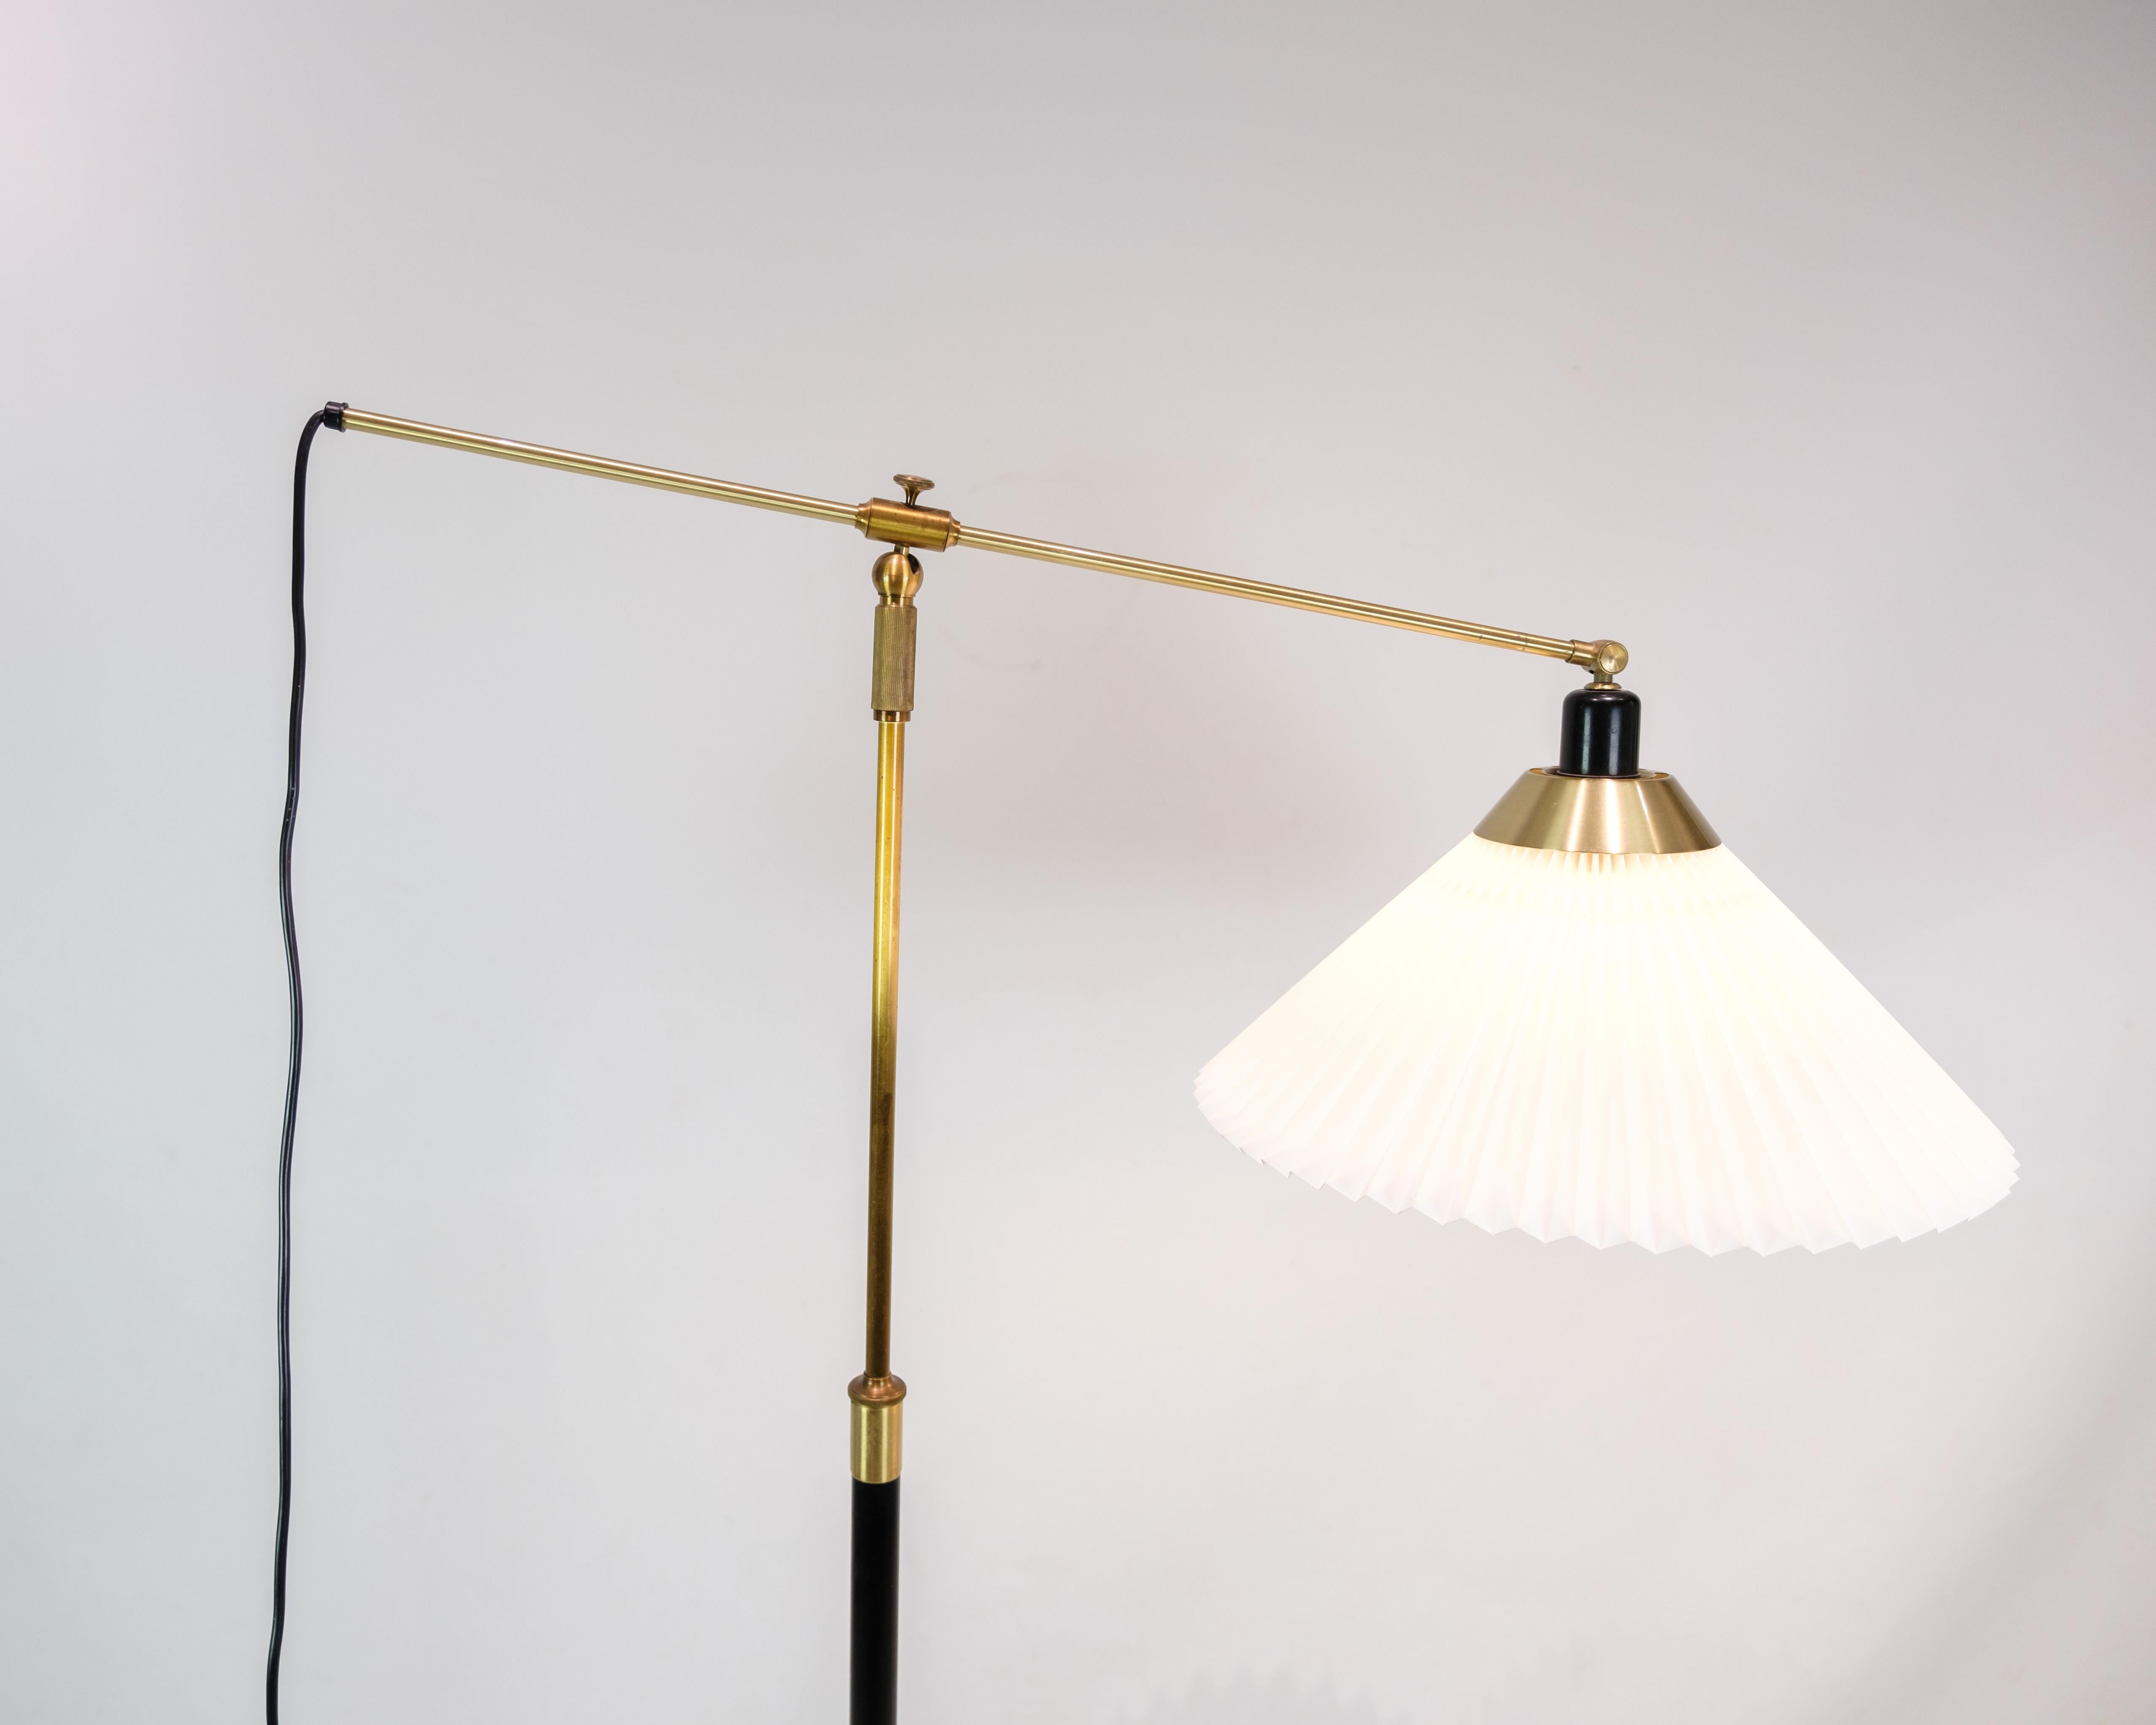 Experience Danish design heritage with this adjustable floor lamp, model 349, from Le Klint, dating back to the 1970s. The lamp combines black painted metal with brass details and exudes both robustness and elegance.

The adjustable function allows